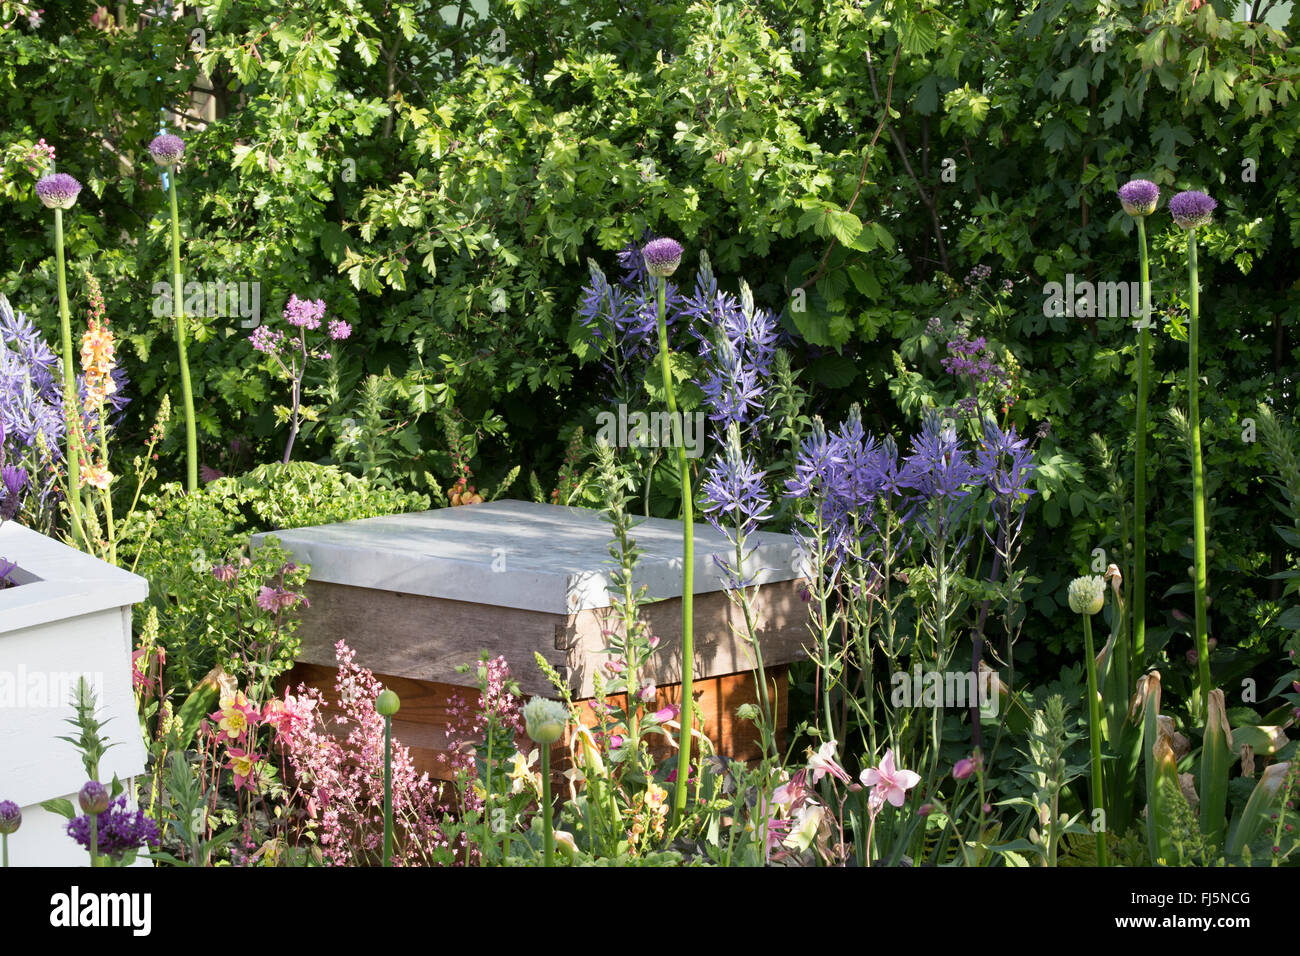 Wildlife friendly small urban garden with beehive in a flower bed for bees planting of Alliums - Camassia leichtlinii England GB UK Stock Photo